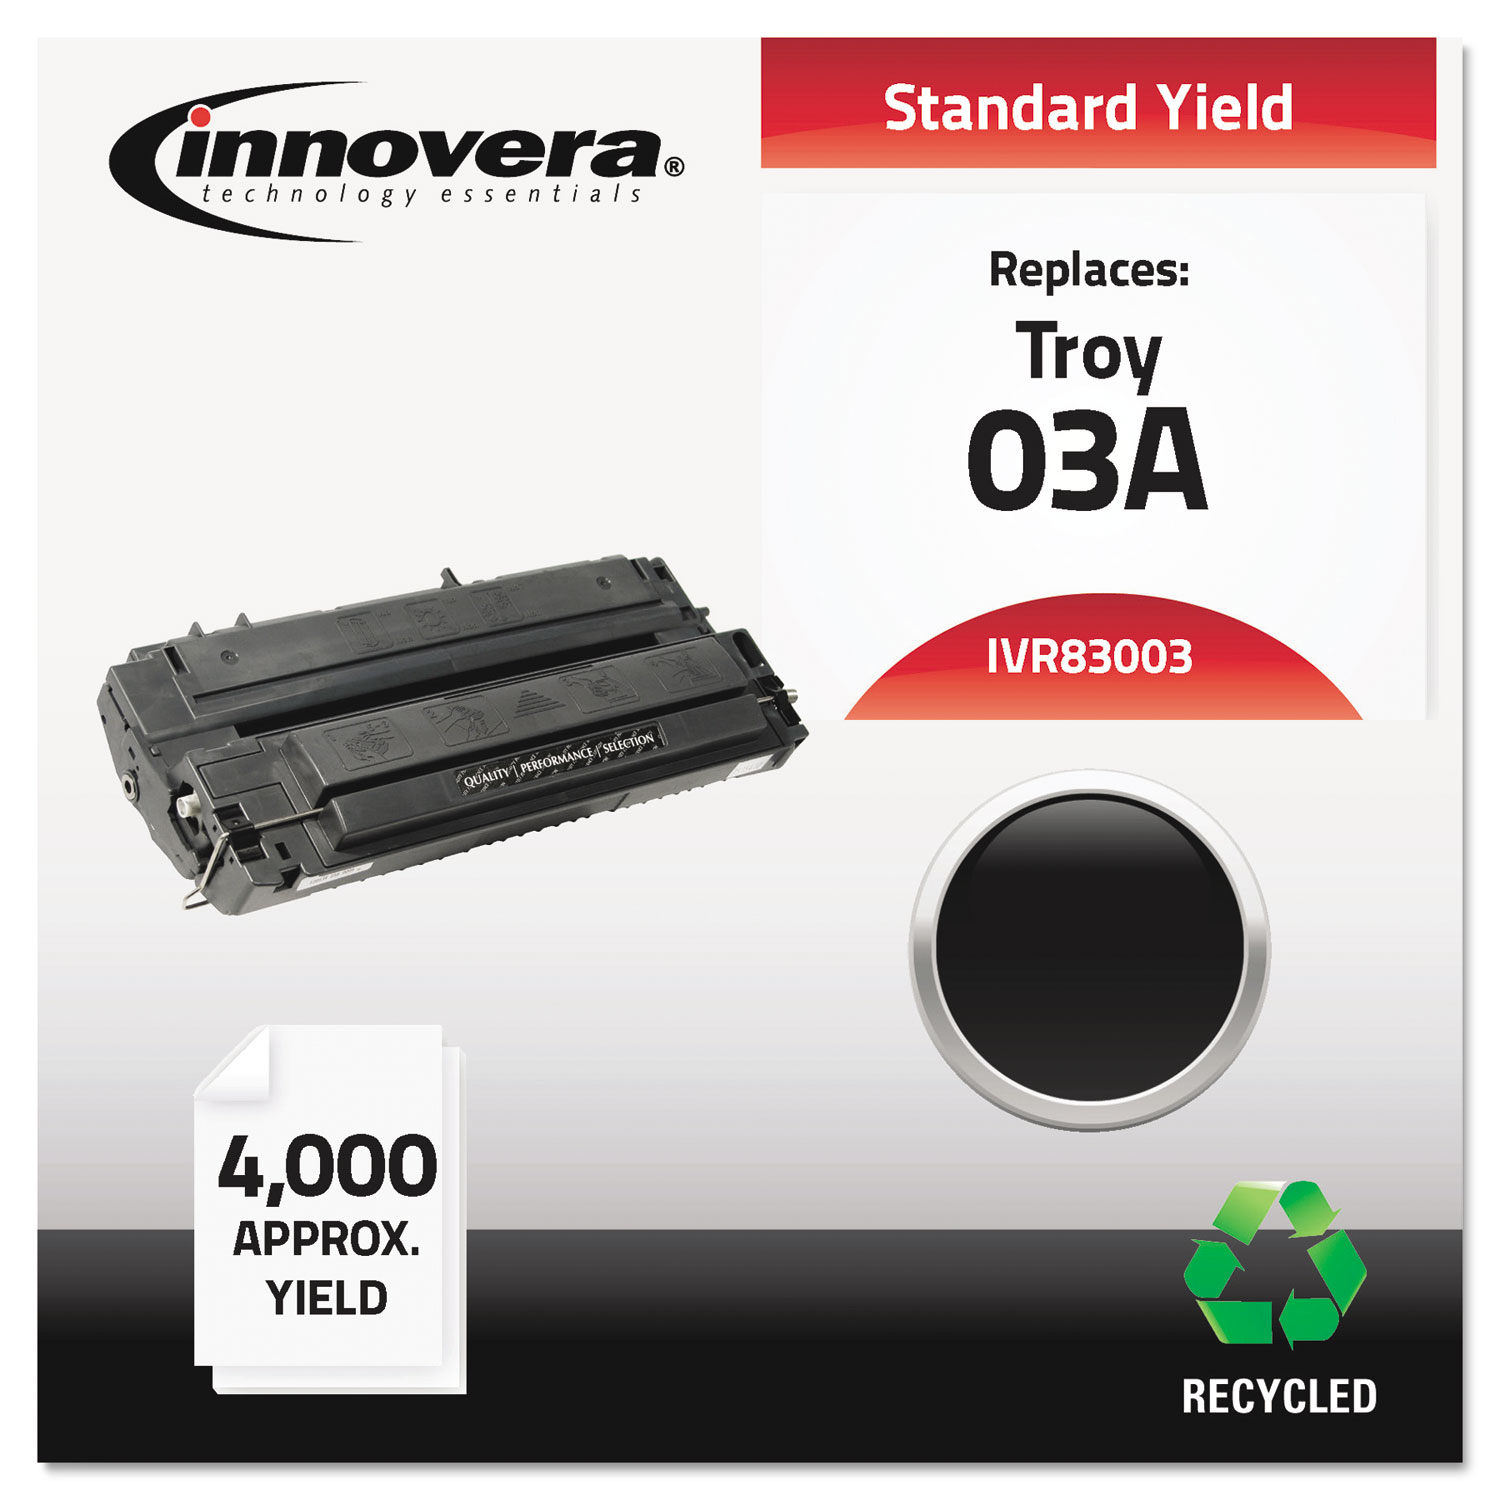 Remanufactured C3903A (03A) Toner, 4000 Page-Yield, Black